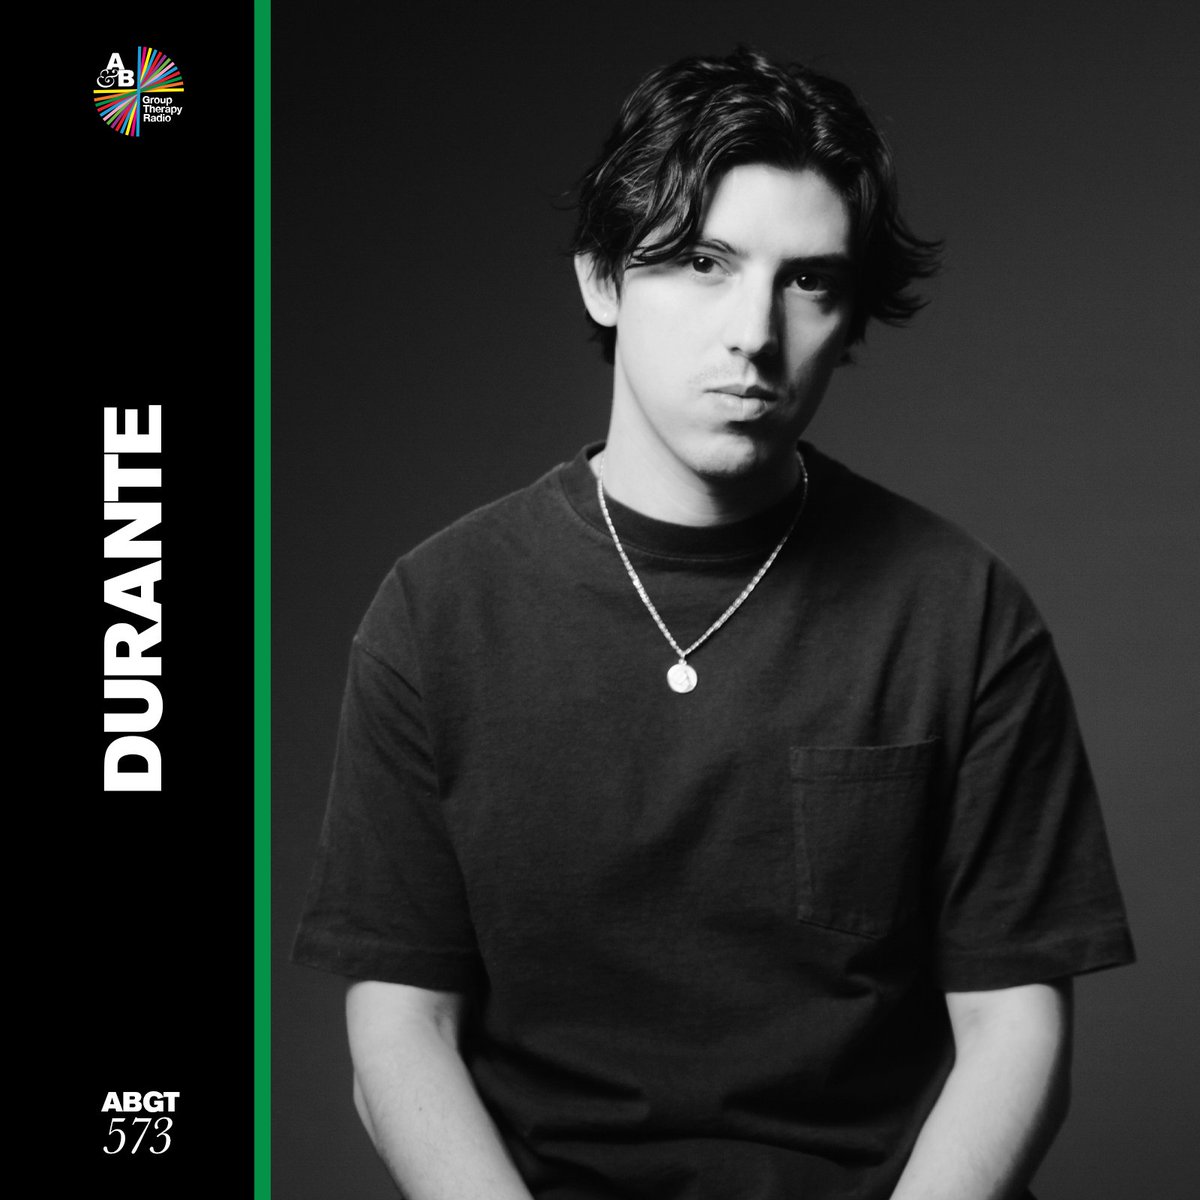 In celebration of his much-awaited debut album 'Enter', @imdurante is on Guest Mix duties today on @abgrouptherapy 📻🚪 Listen: ffm.bio/abgtradio